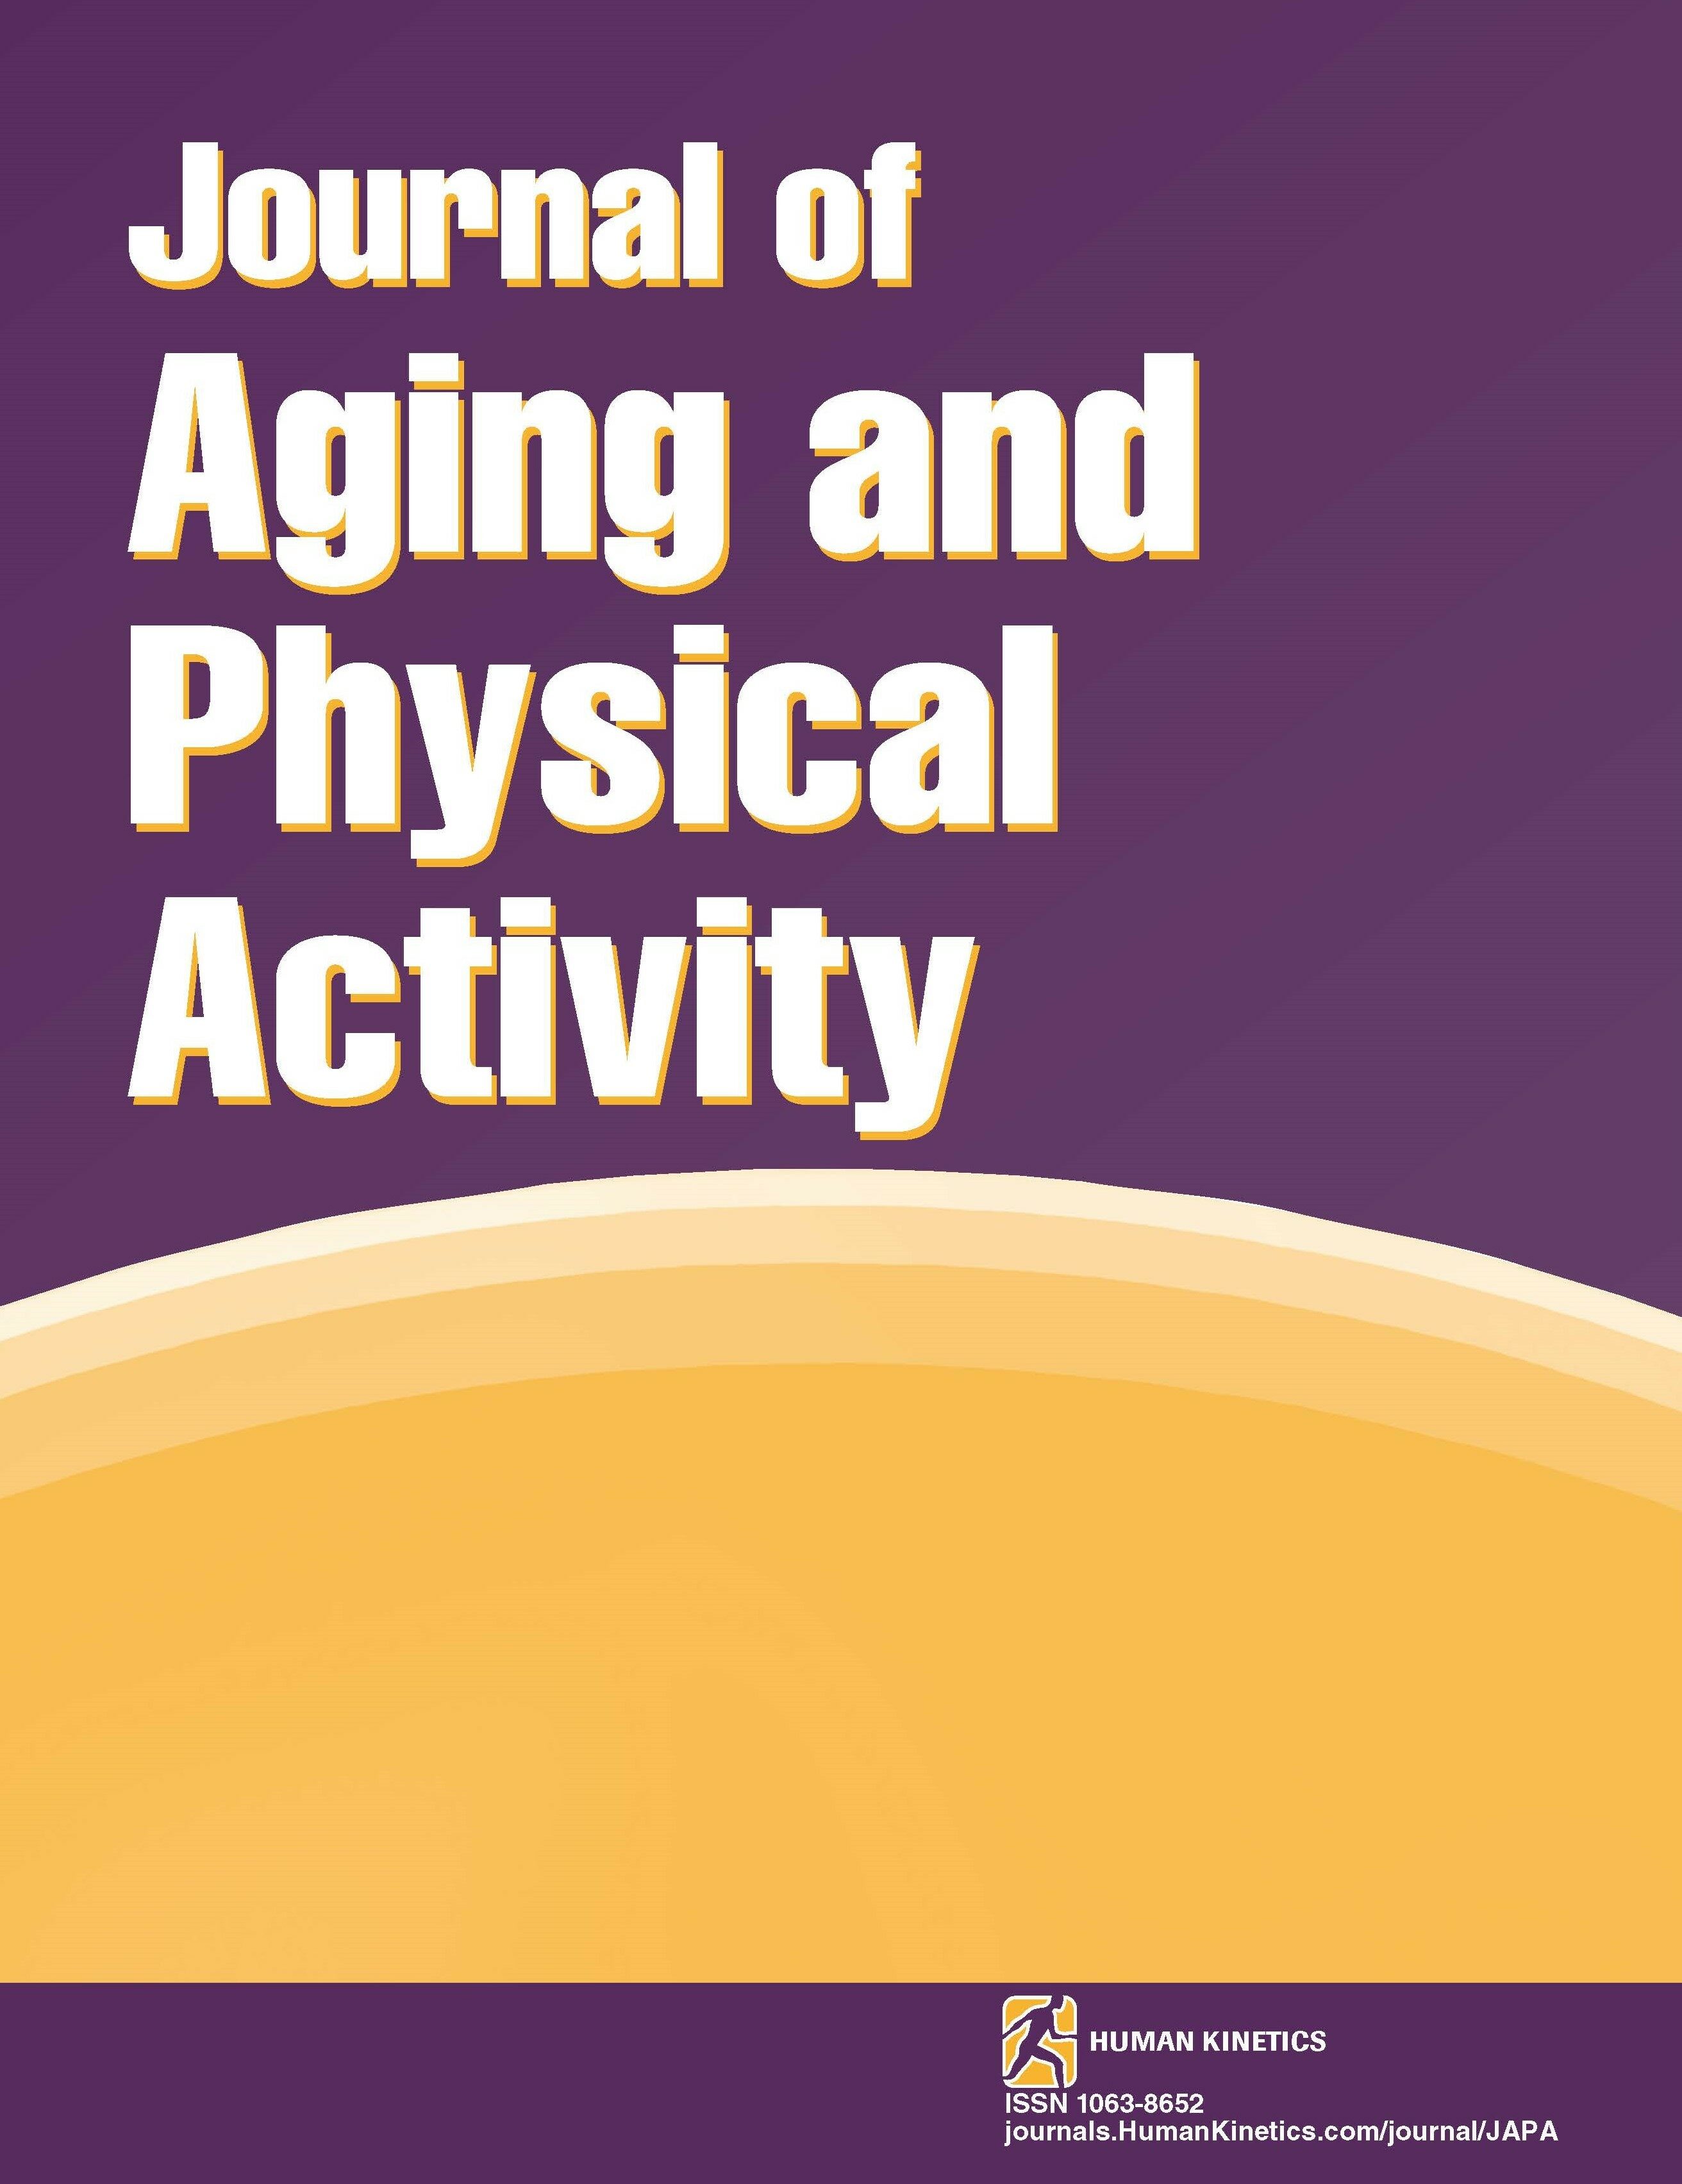 Association of Physical Activity With Cognitive Function Among Older Adults in Rural Sichuan, China